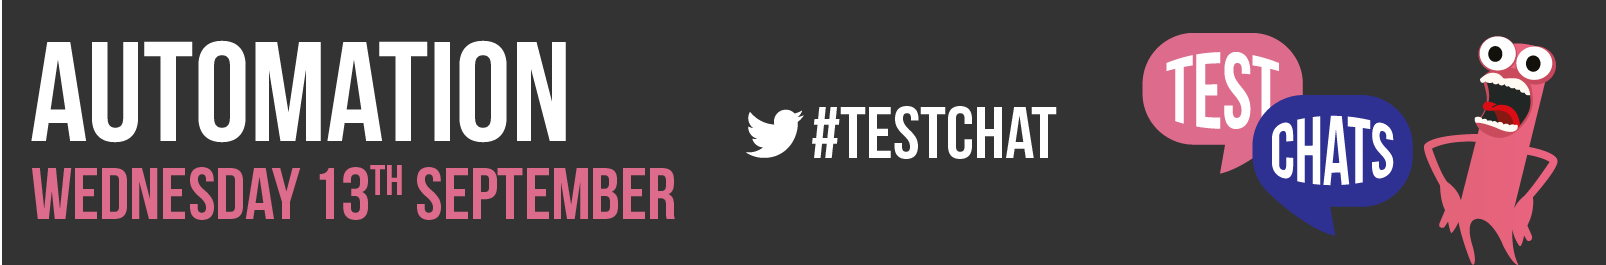 #TestChat - Automation banner image